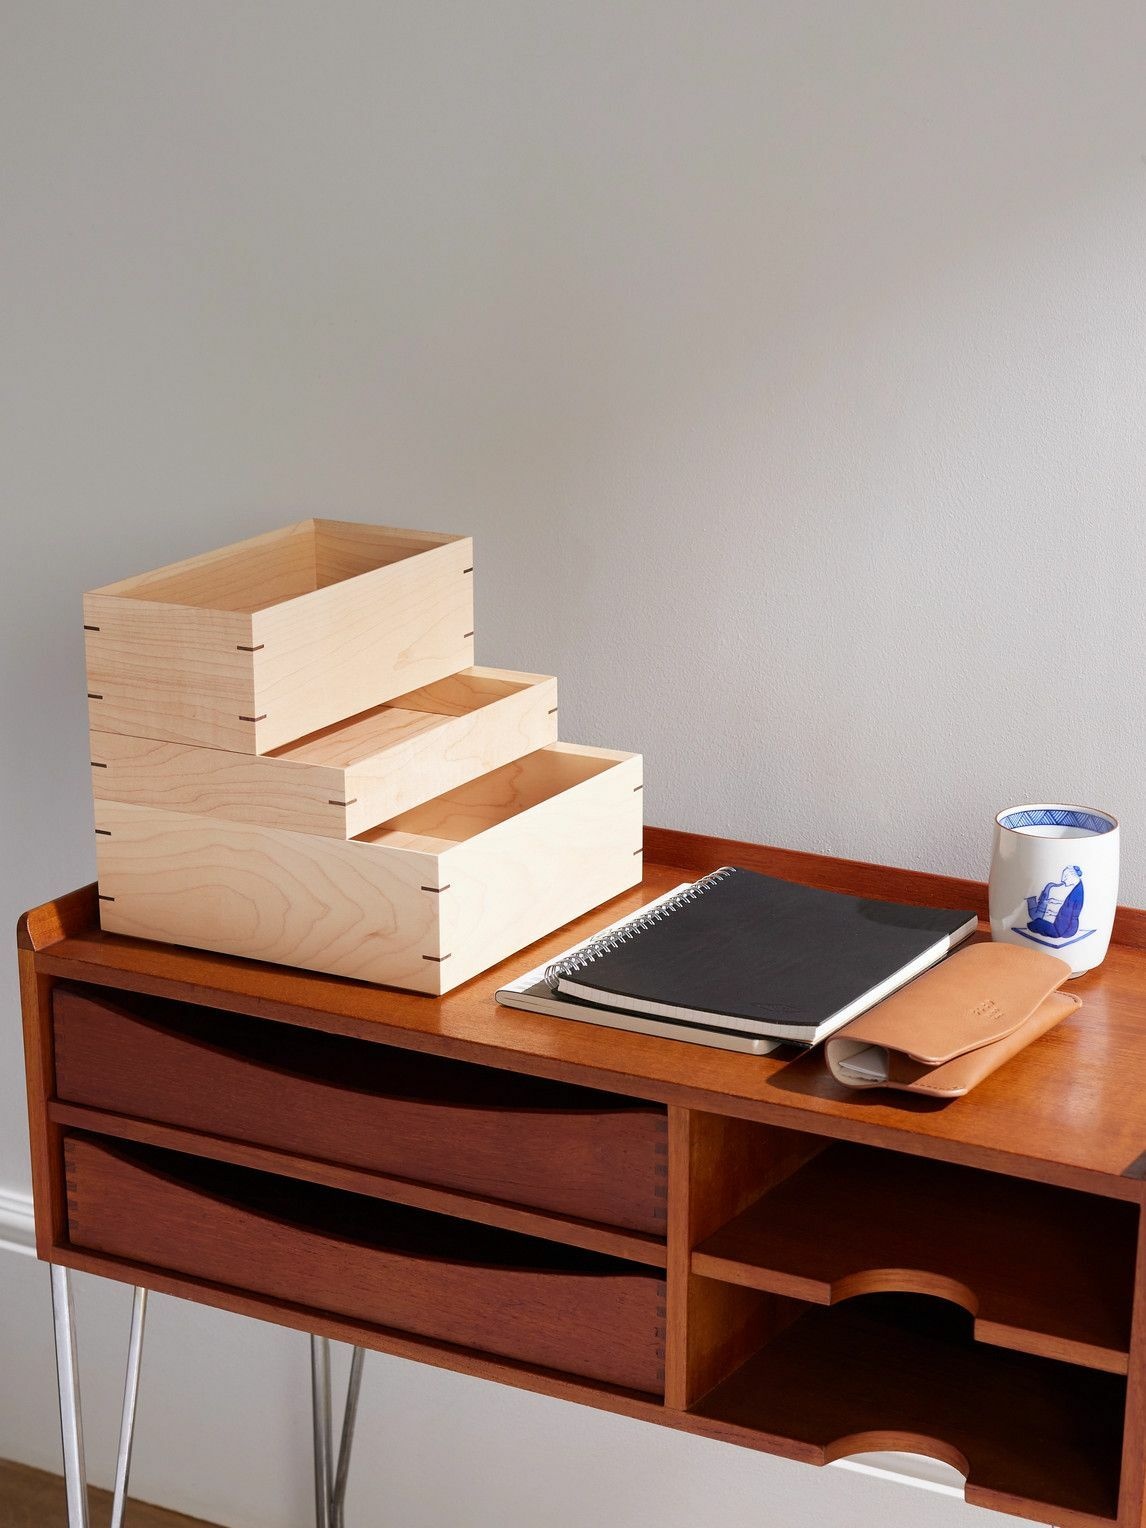 Photo: Japan Best - Set of Three Stackable Wood Desk Trays